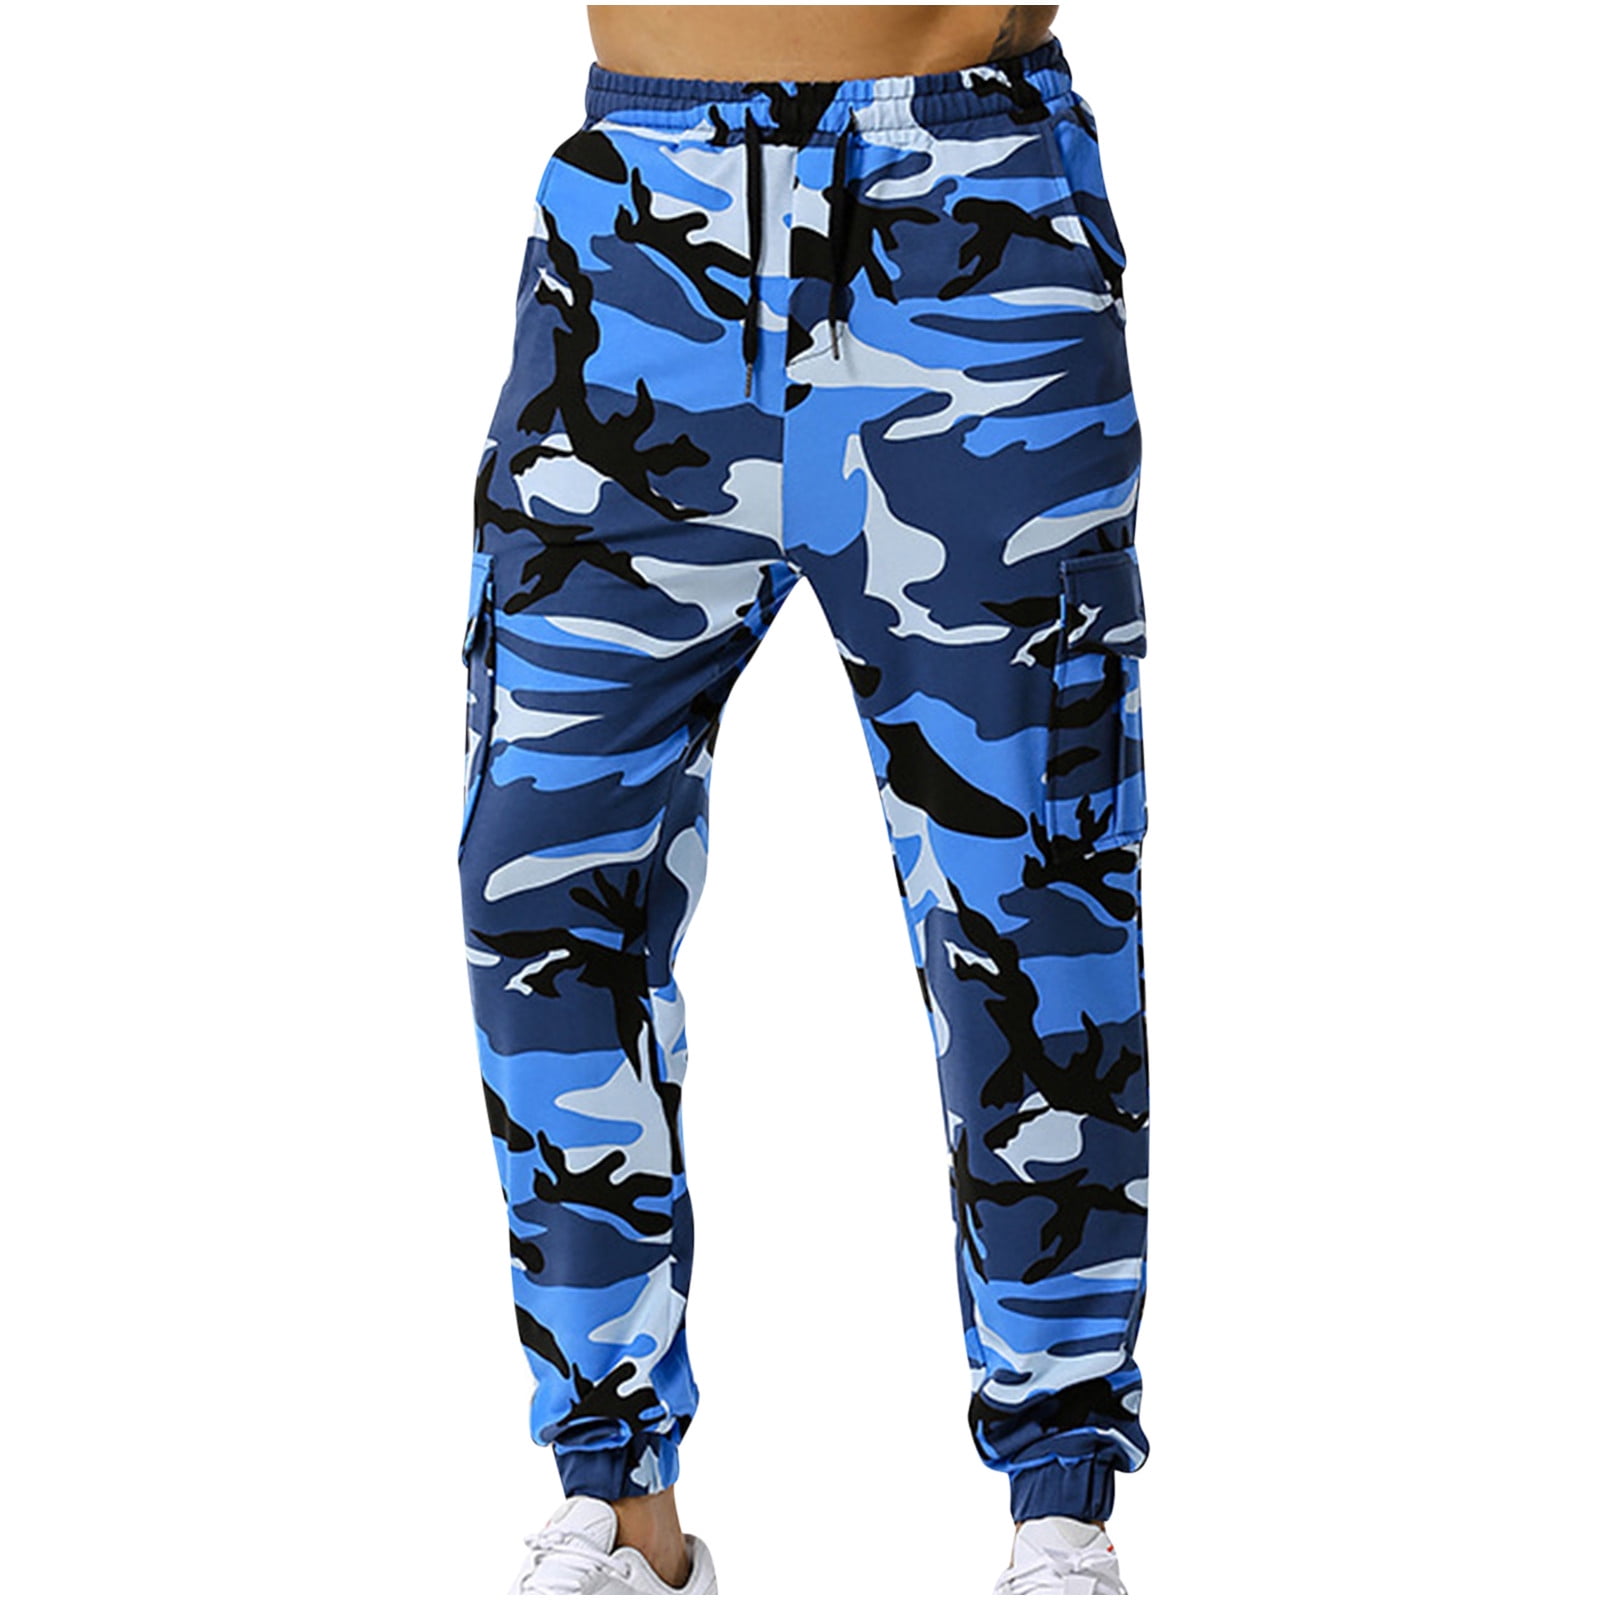 Williamsburg Garment Co Light Weight Camouflage Pant, $102 | Bluefly |  Lookastic